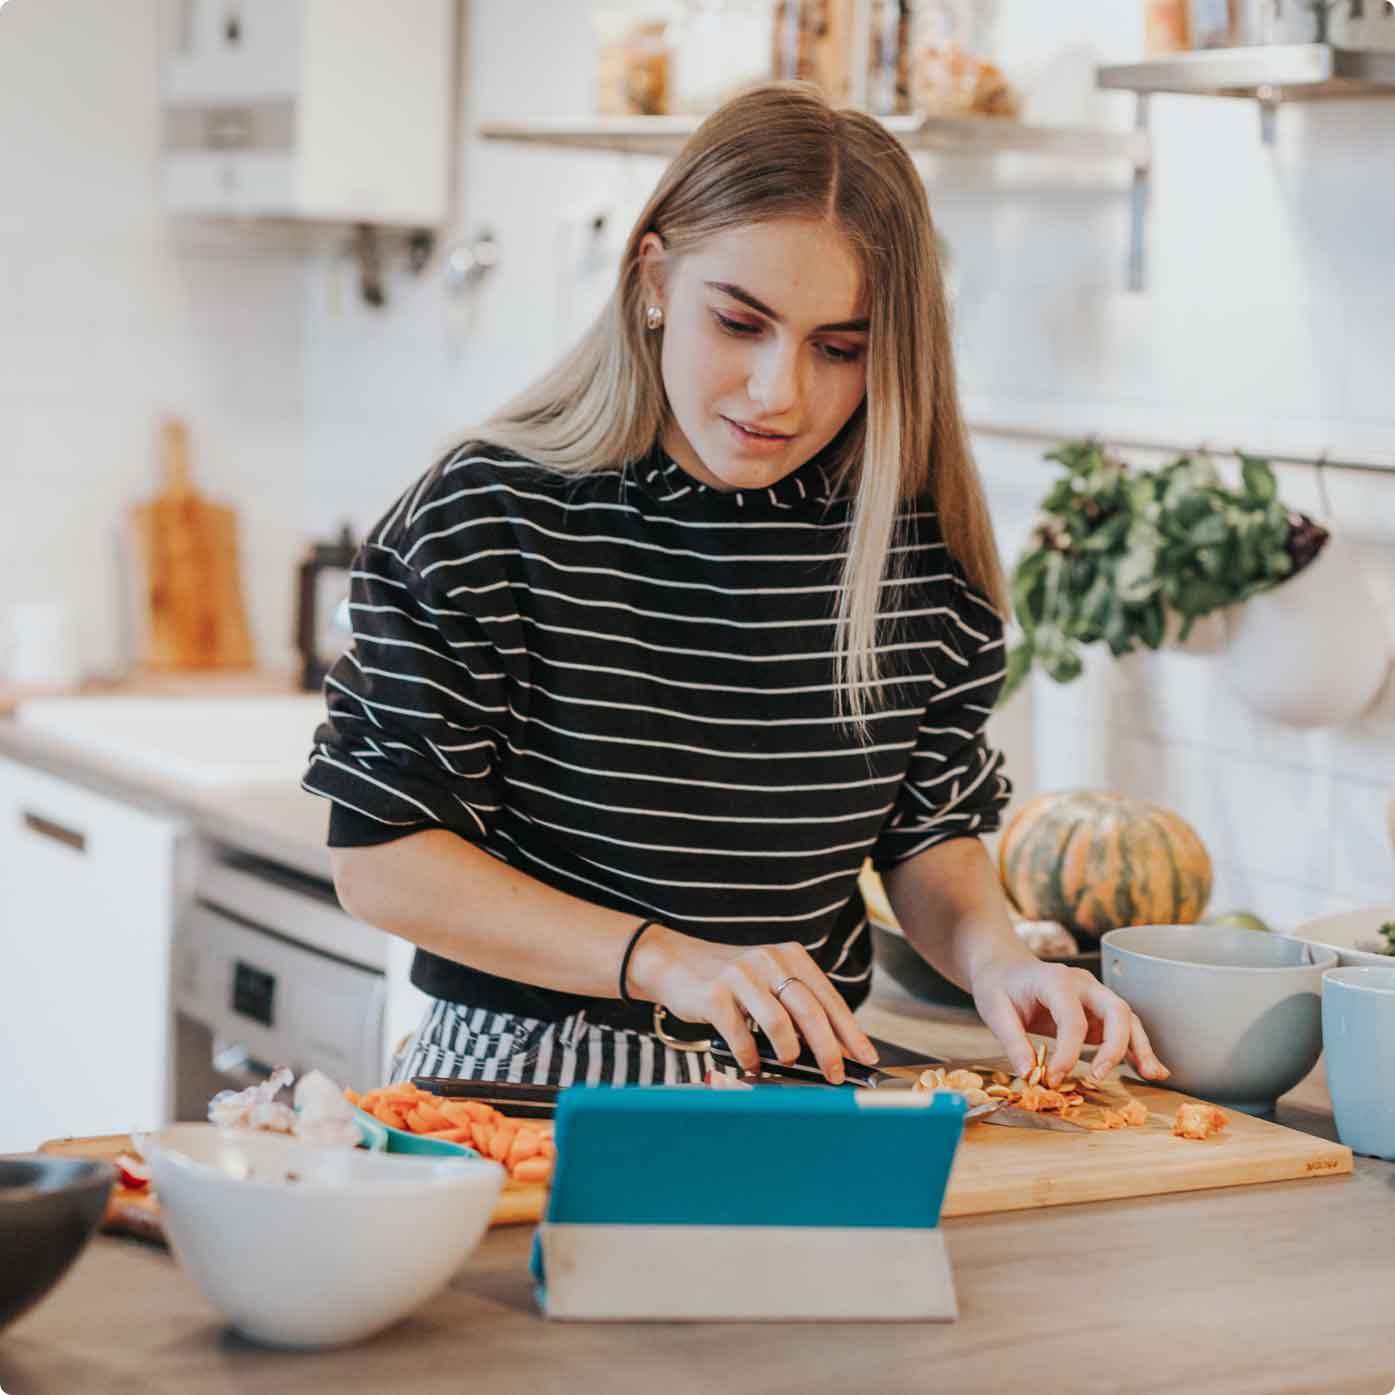 Woman using digital tablet in kitchen while preparing food